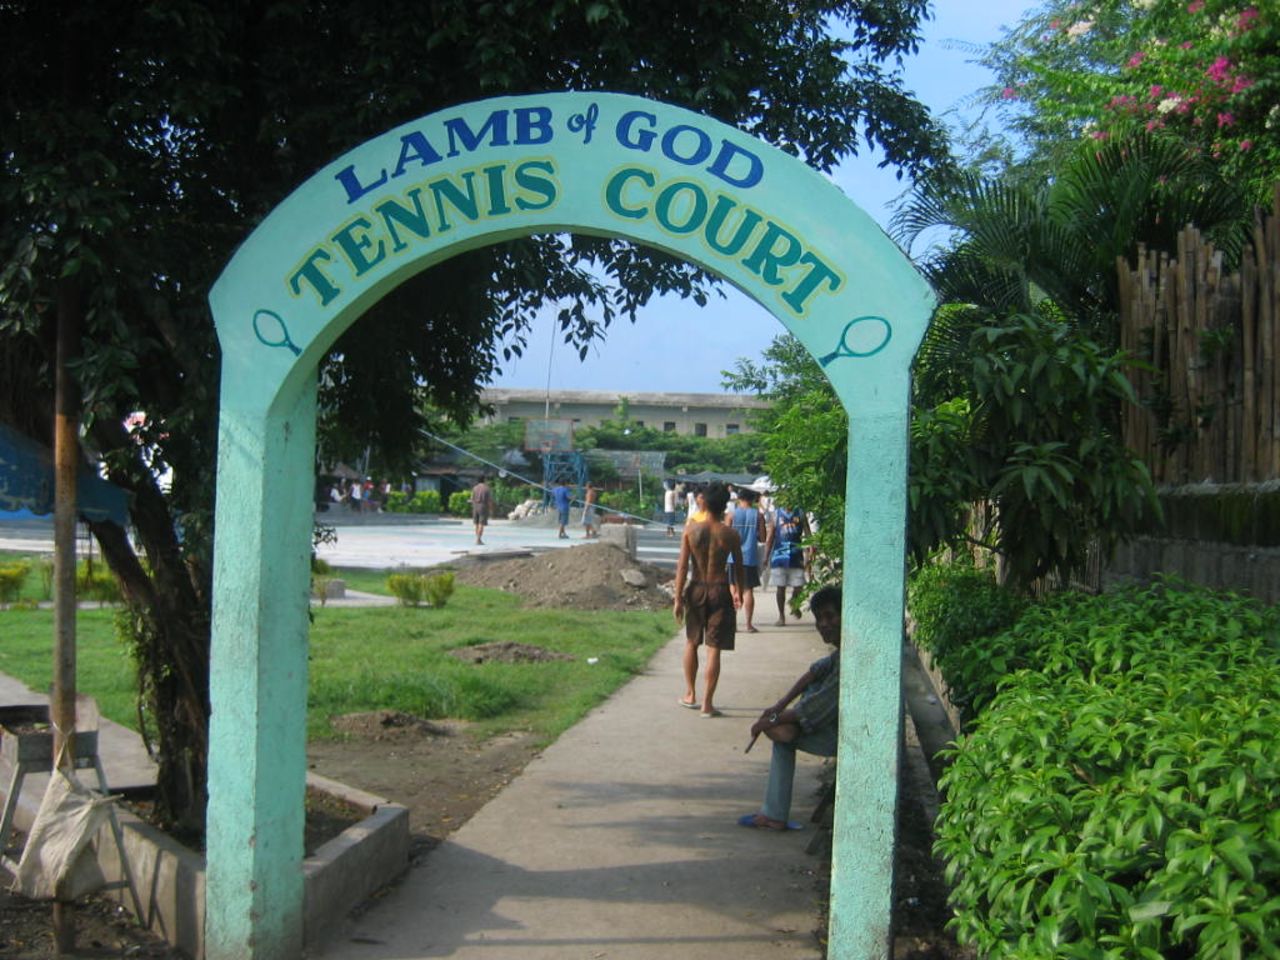 The entrance to the mini-park and tennis court. "This is a project of the Lamb of God Foundation, an inmate organization duly registered to the Securities and Exchange Commission," Narag says. "The Tennis Court was constructed through inmate initiatives. Inmates organize competitions and invite professional tennis players to play with them."